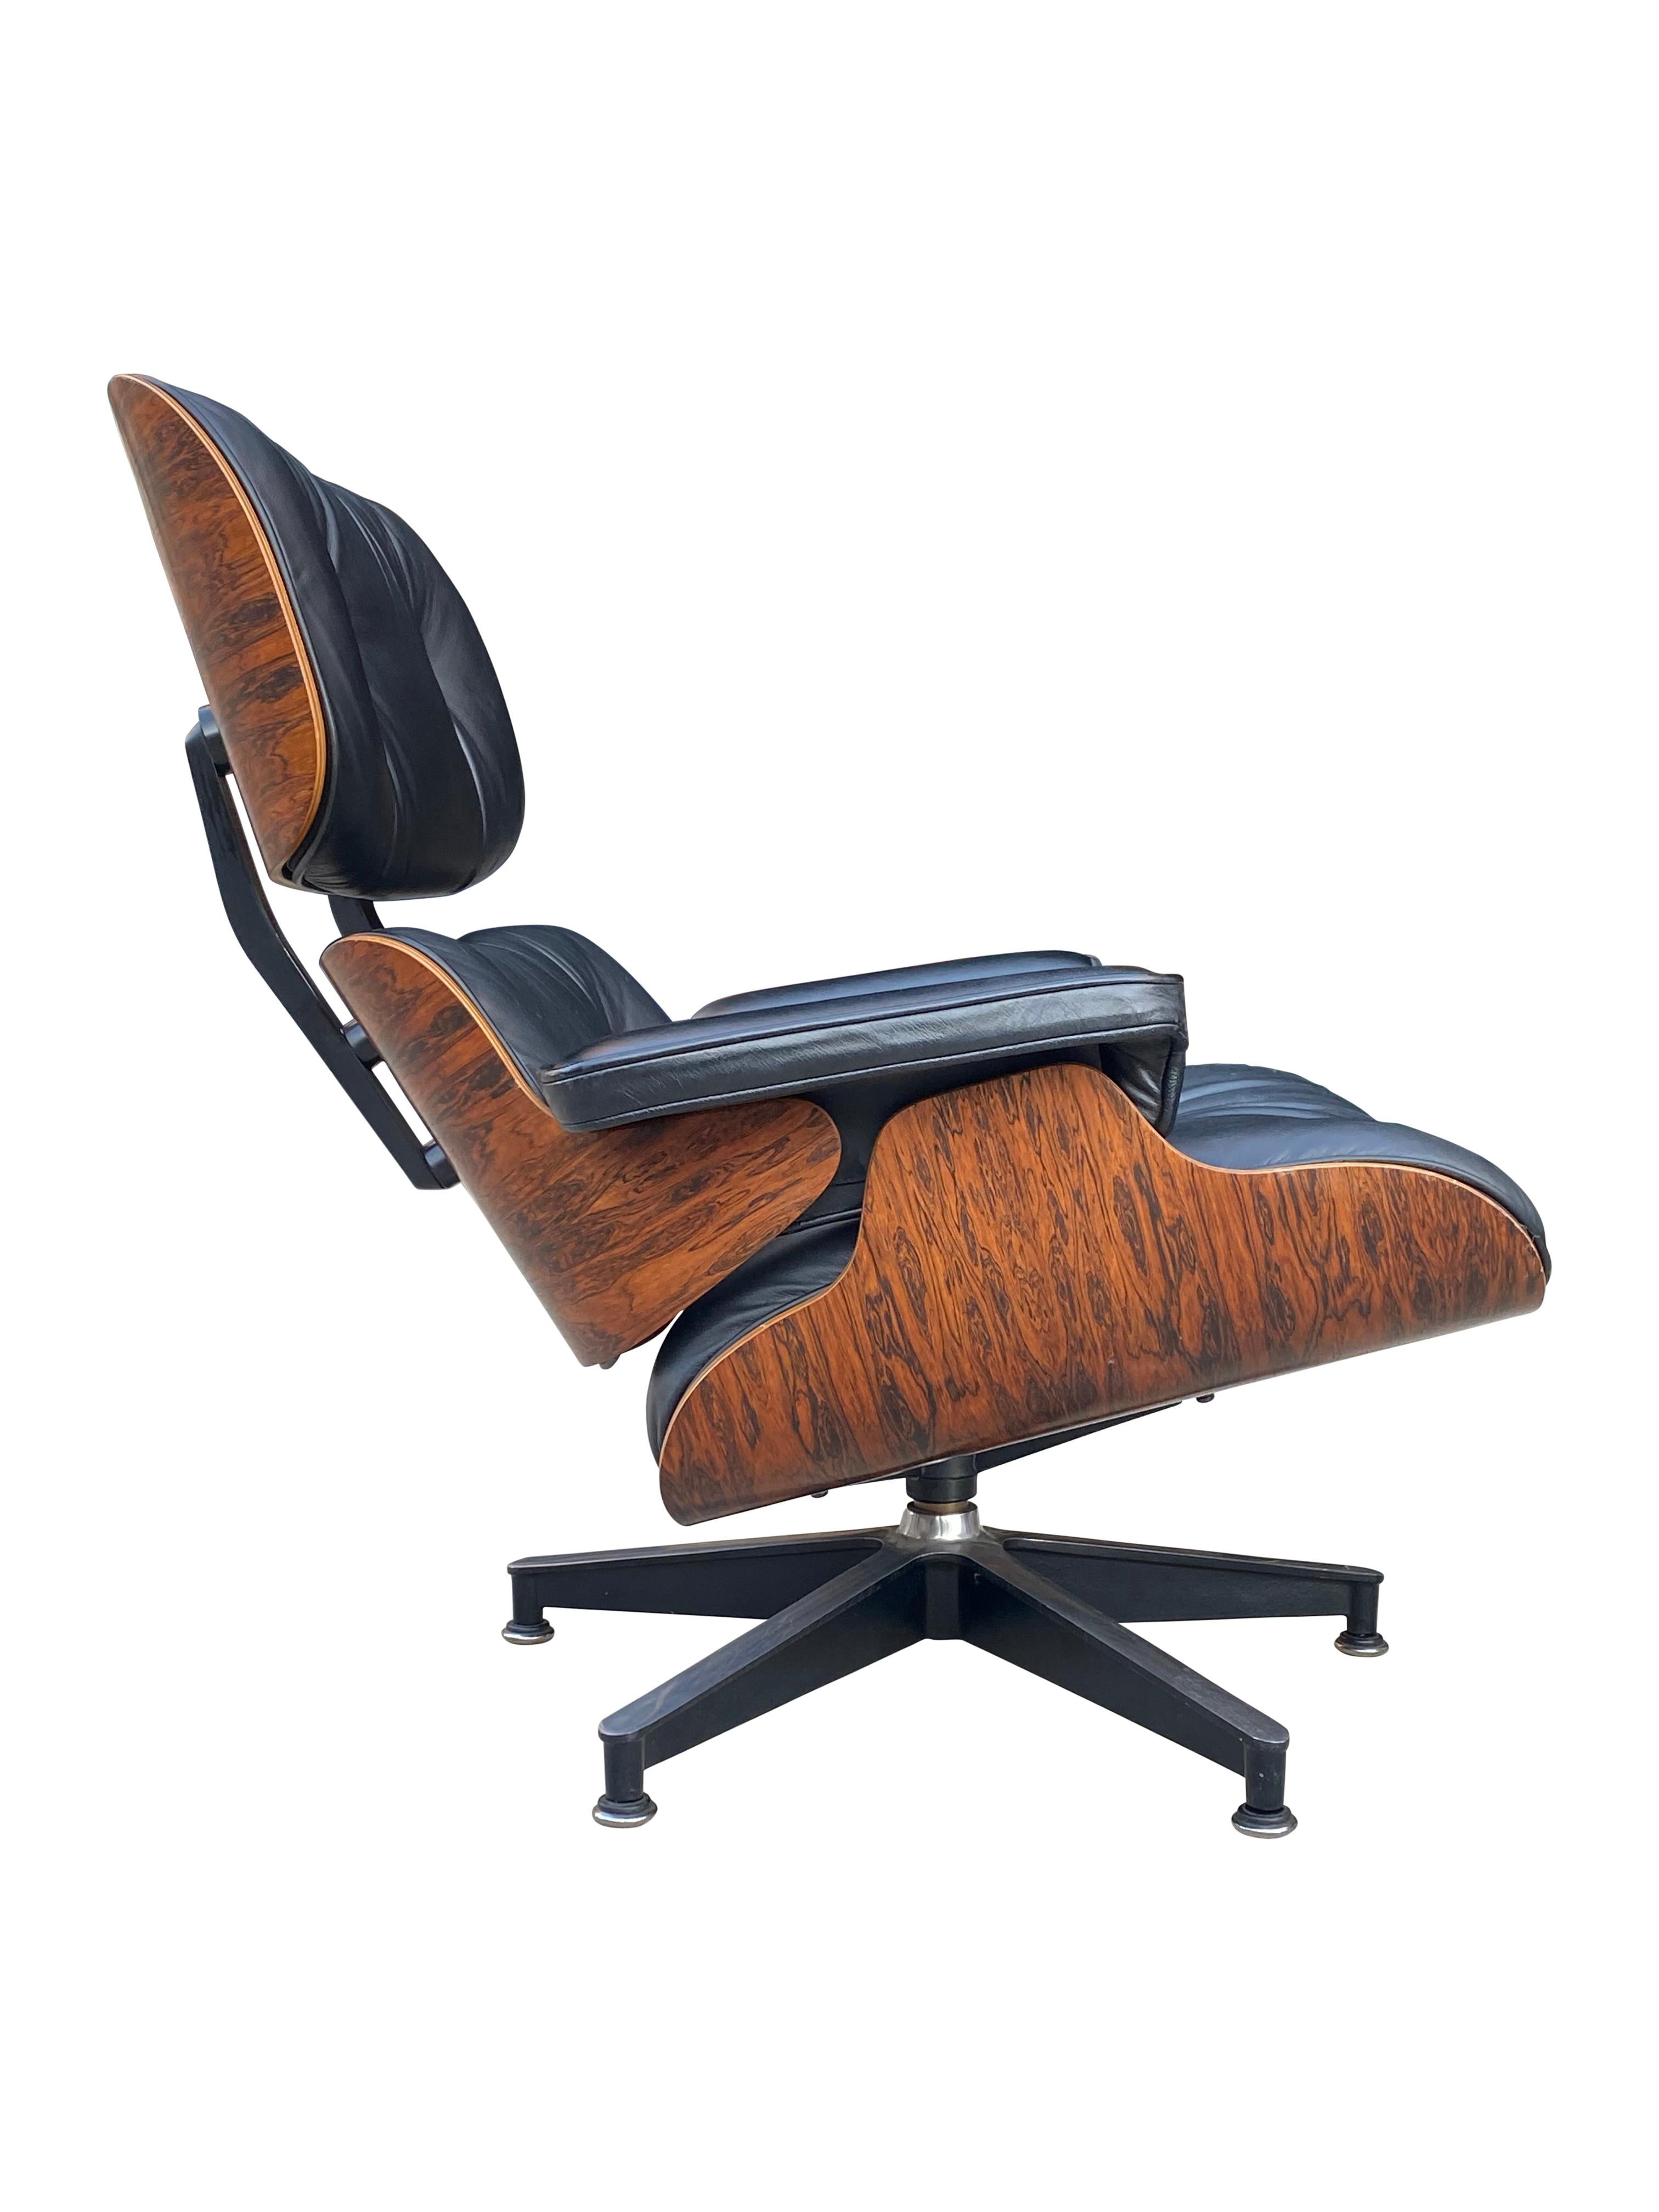 Spectacular Herman Miller Eames Lounge Chair and Ottoman 1